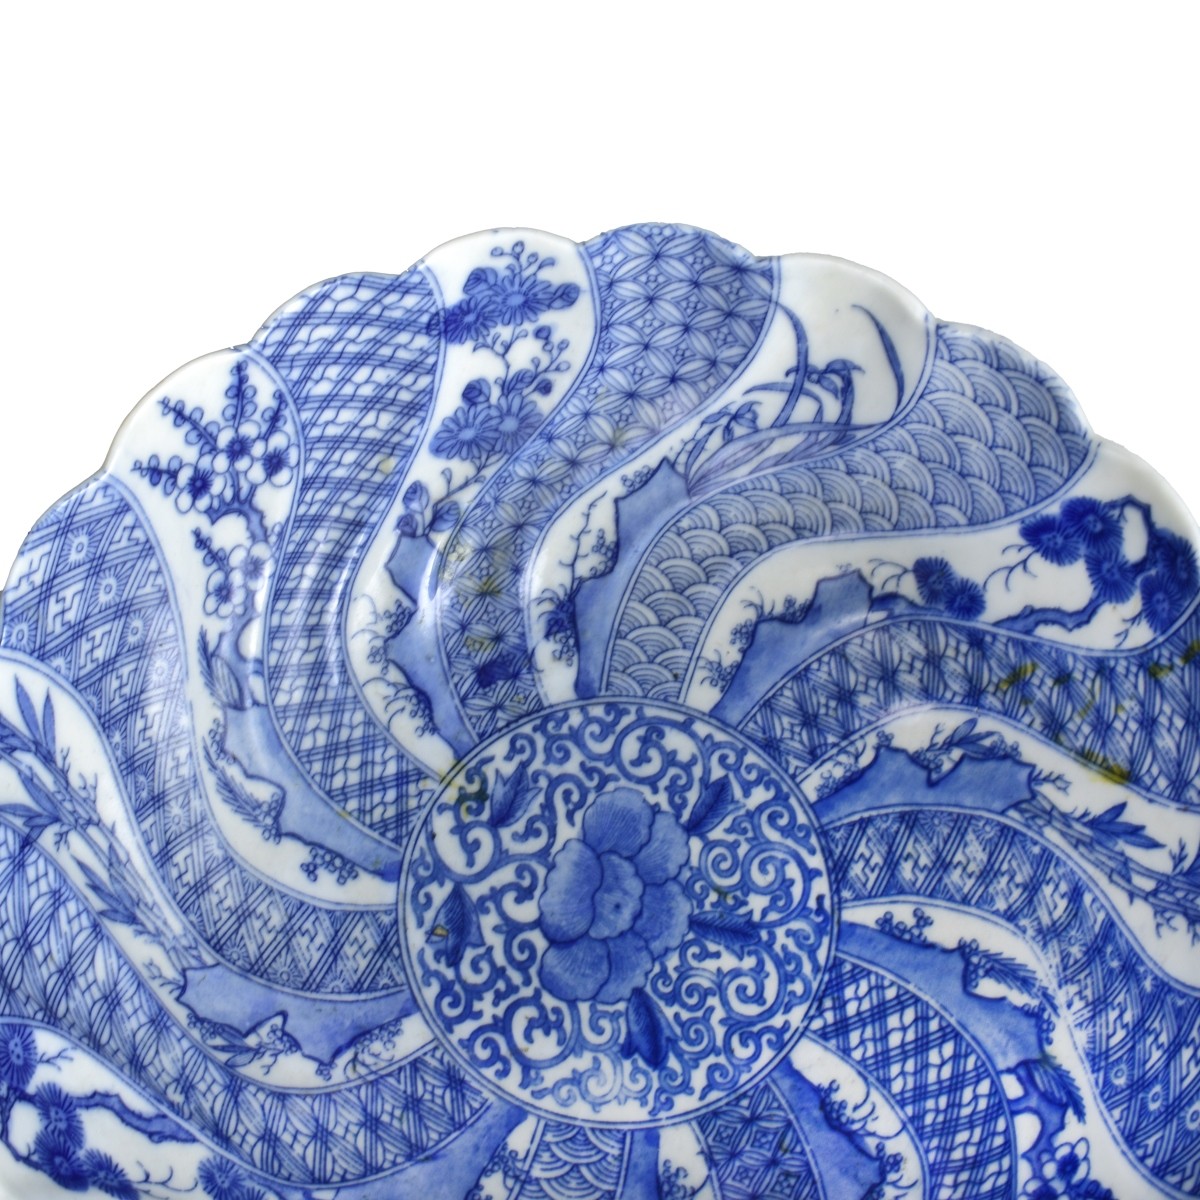 Japanese Blue and White Scalloped Bowl